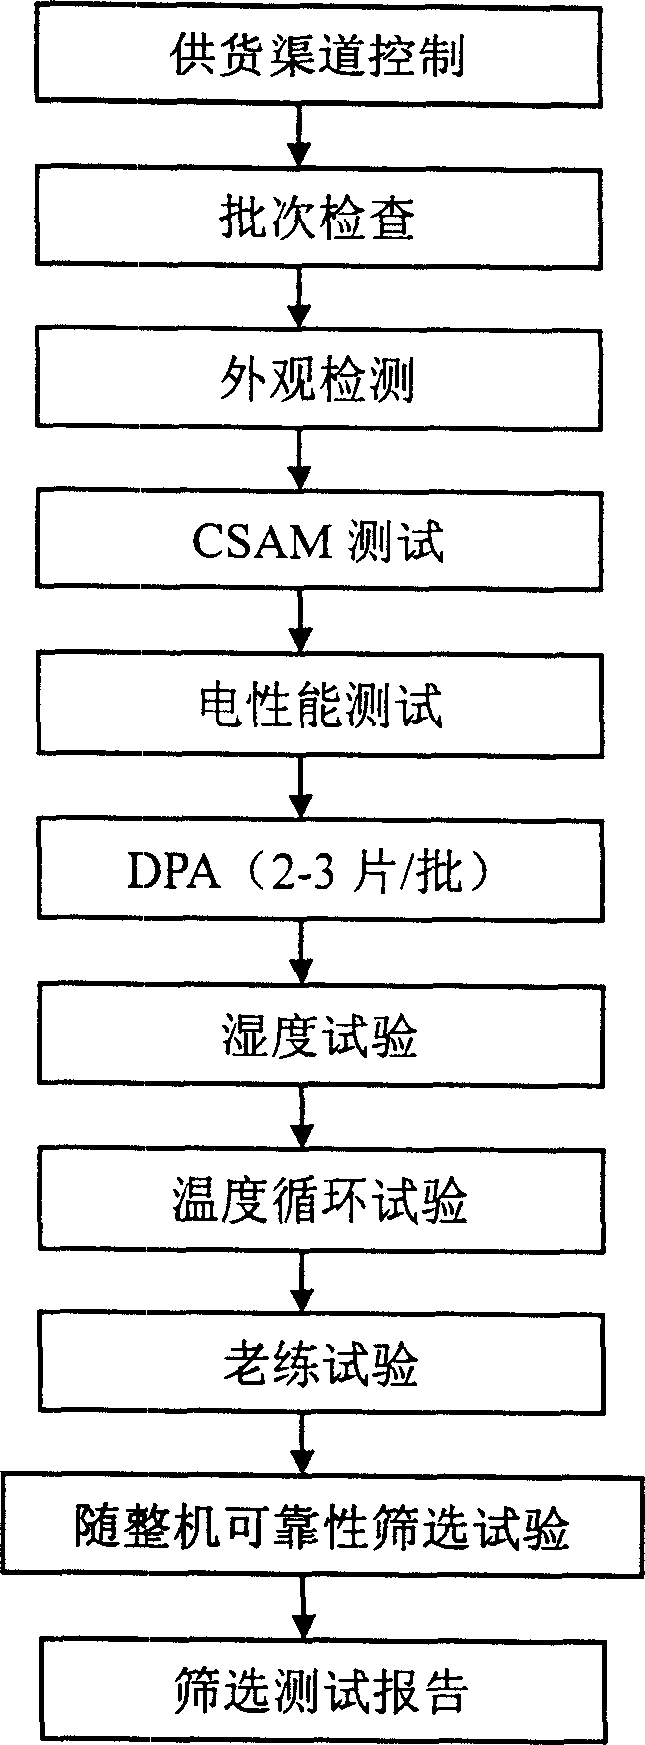 Screening method for commercial plastic packaging device space application